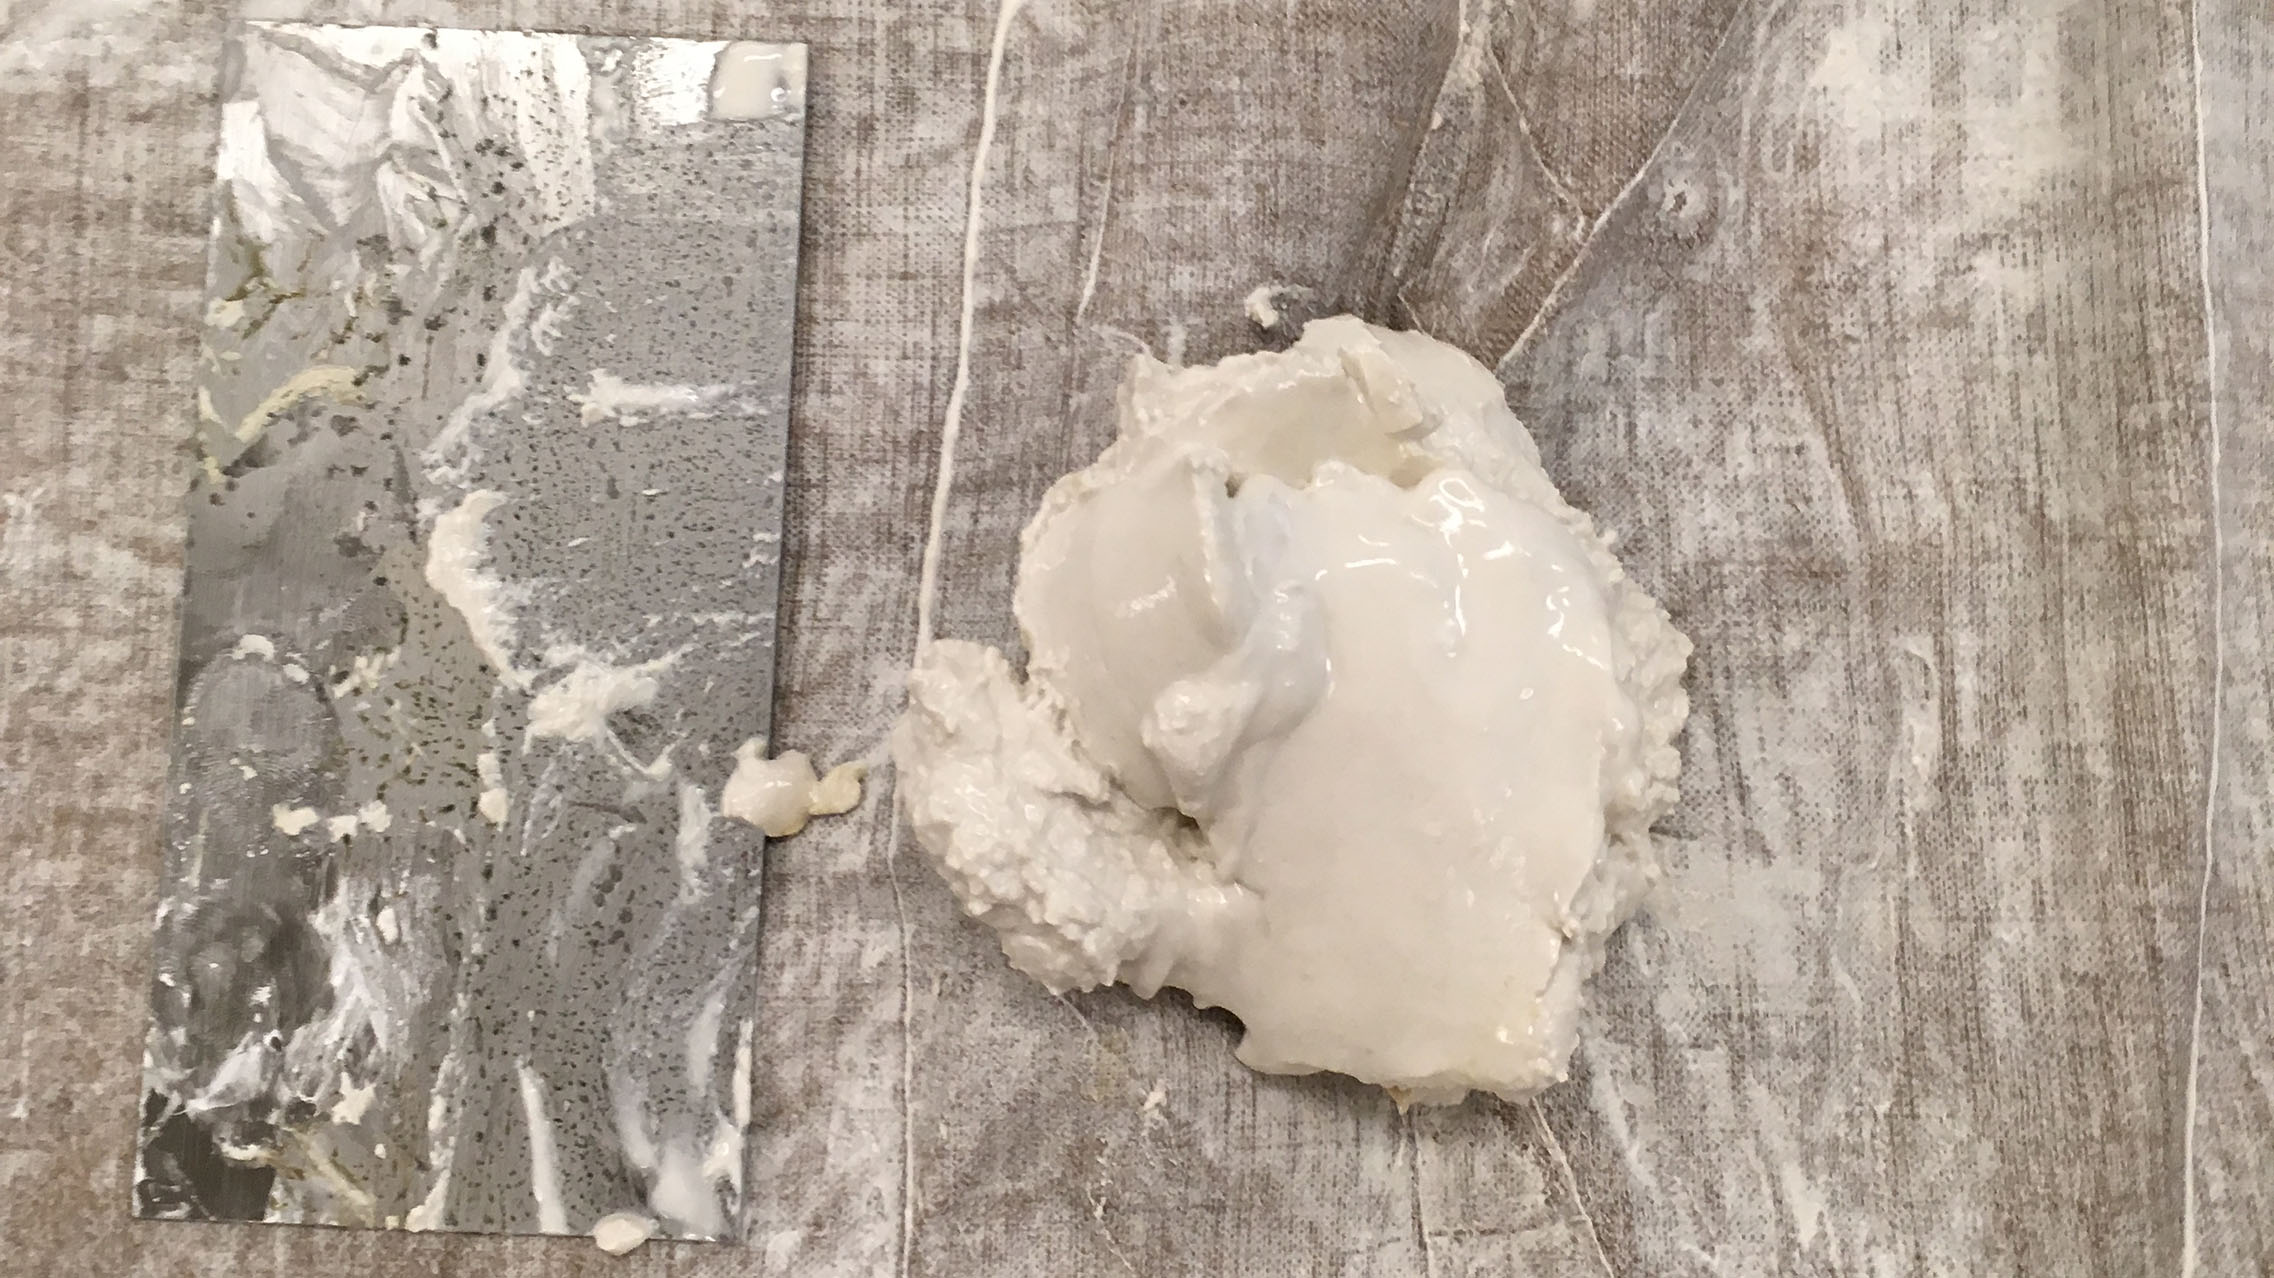 lump of slaked paster of paris, during the making of gesso sottile cakes